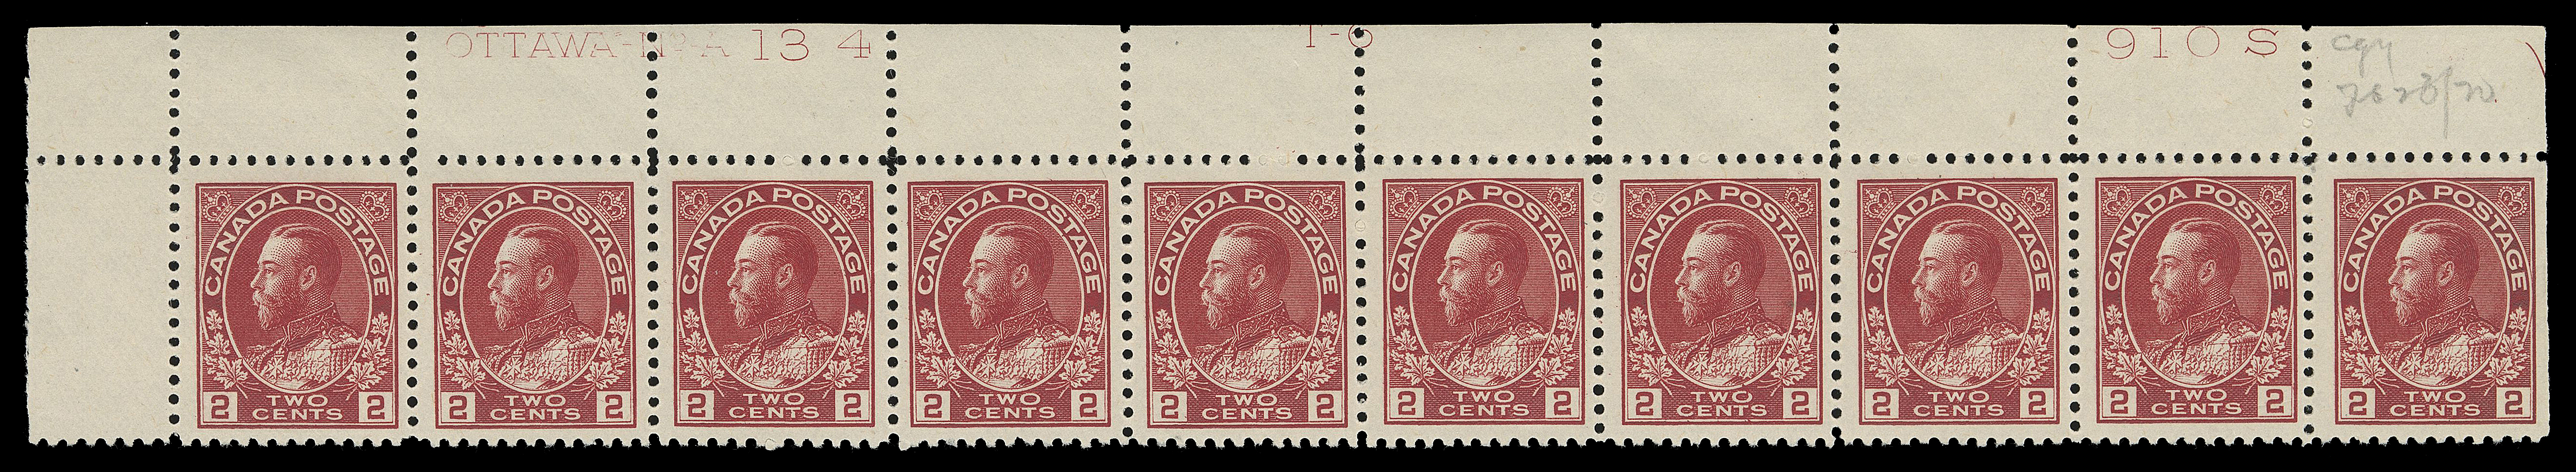 ADMIRAL STAMPS  106, 106iii,Three strips of ten with consecutive plate numbers, UL Plate 134 in dark shade, UR Plate 135, UR Plate 136, last two with split perfs supported by hinges between last two and three stamps respectively, other 25 stamps are NH, VF (Unitrade cat. $3,200)